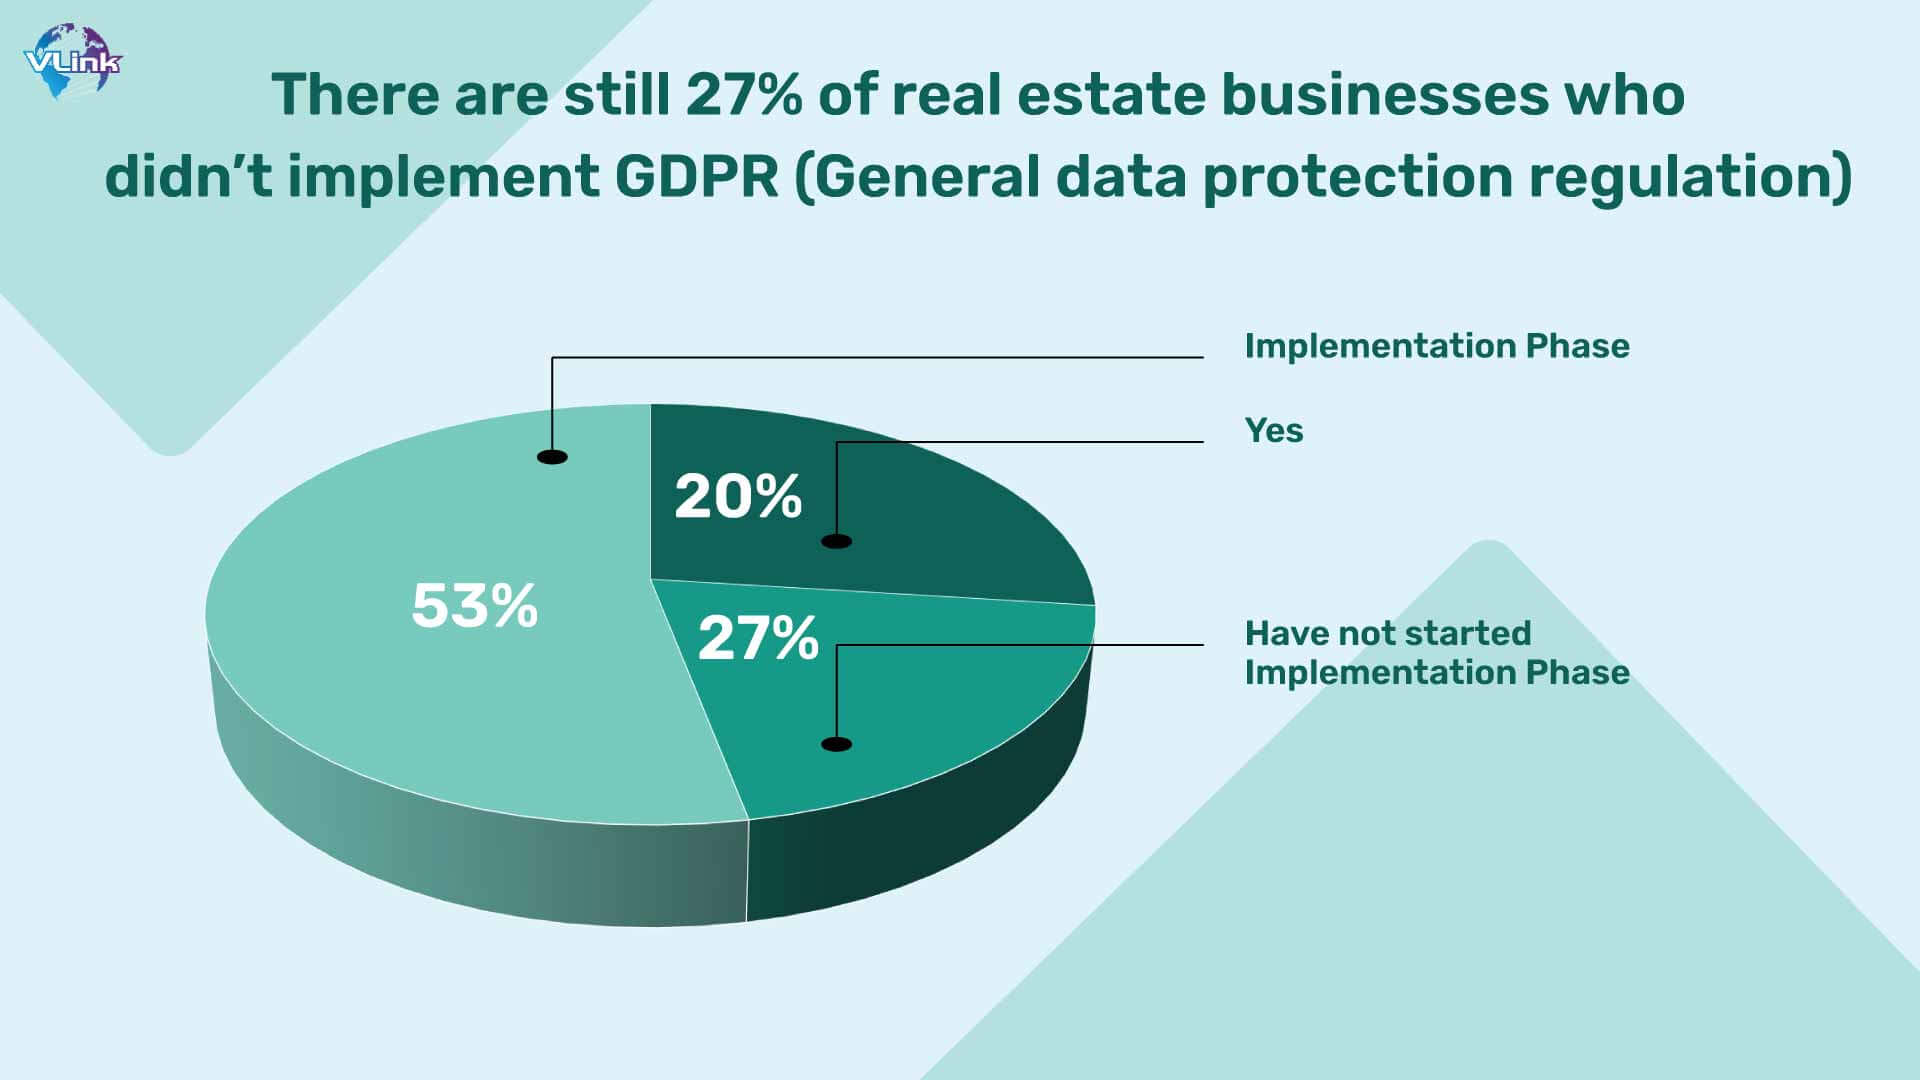 There are still 27% of real estate businesses who didn’t implement GDPR